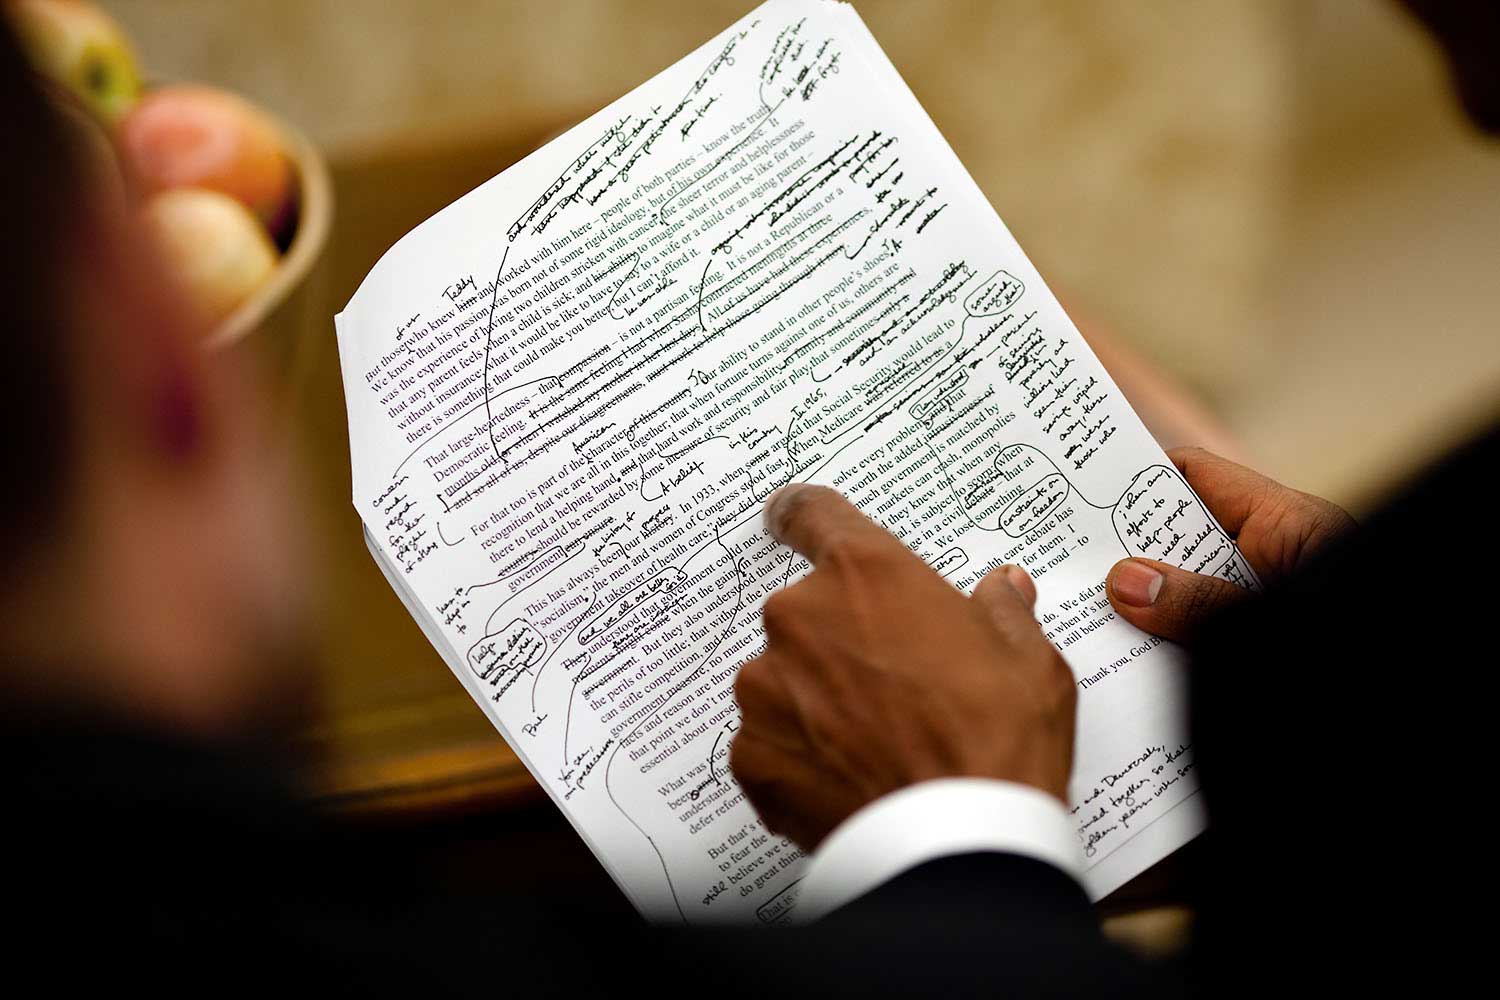 “The President works on his health care speech with his chief speechwriter, Jon Favreau, in the Oval Office, Sept. 9, 2009. I noticed his handwritten edits and made this close-up. It’s a simple picture but it tells volumes about how involved he is in writing and editing his speeches.”